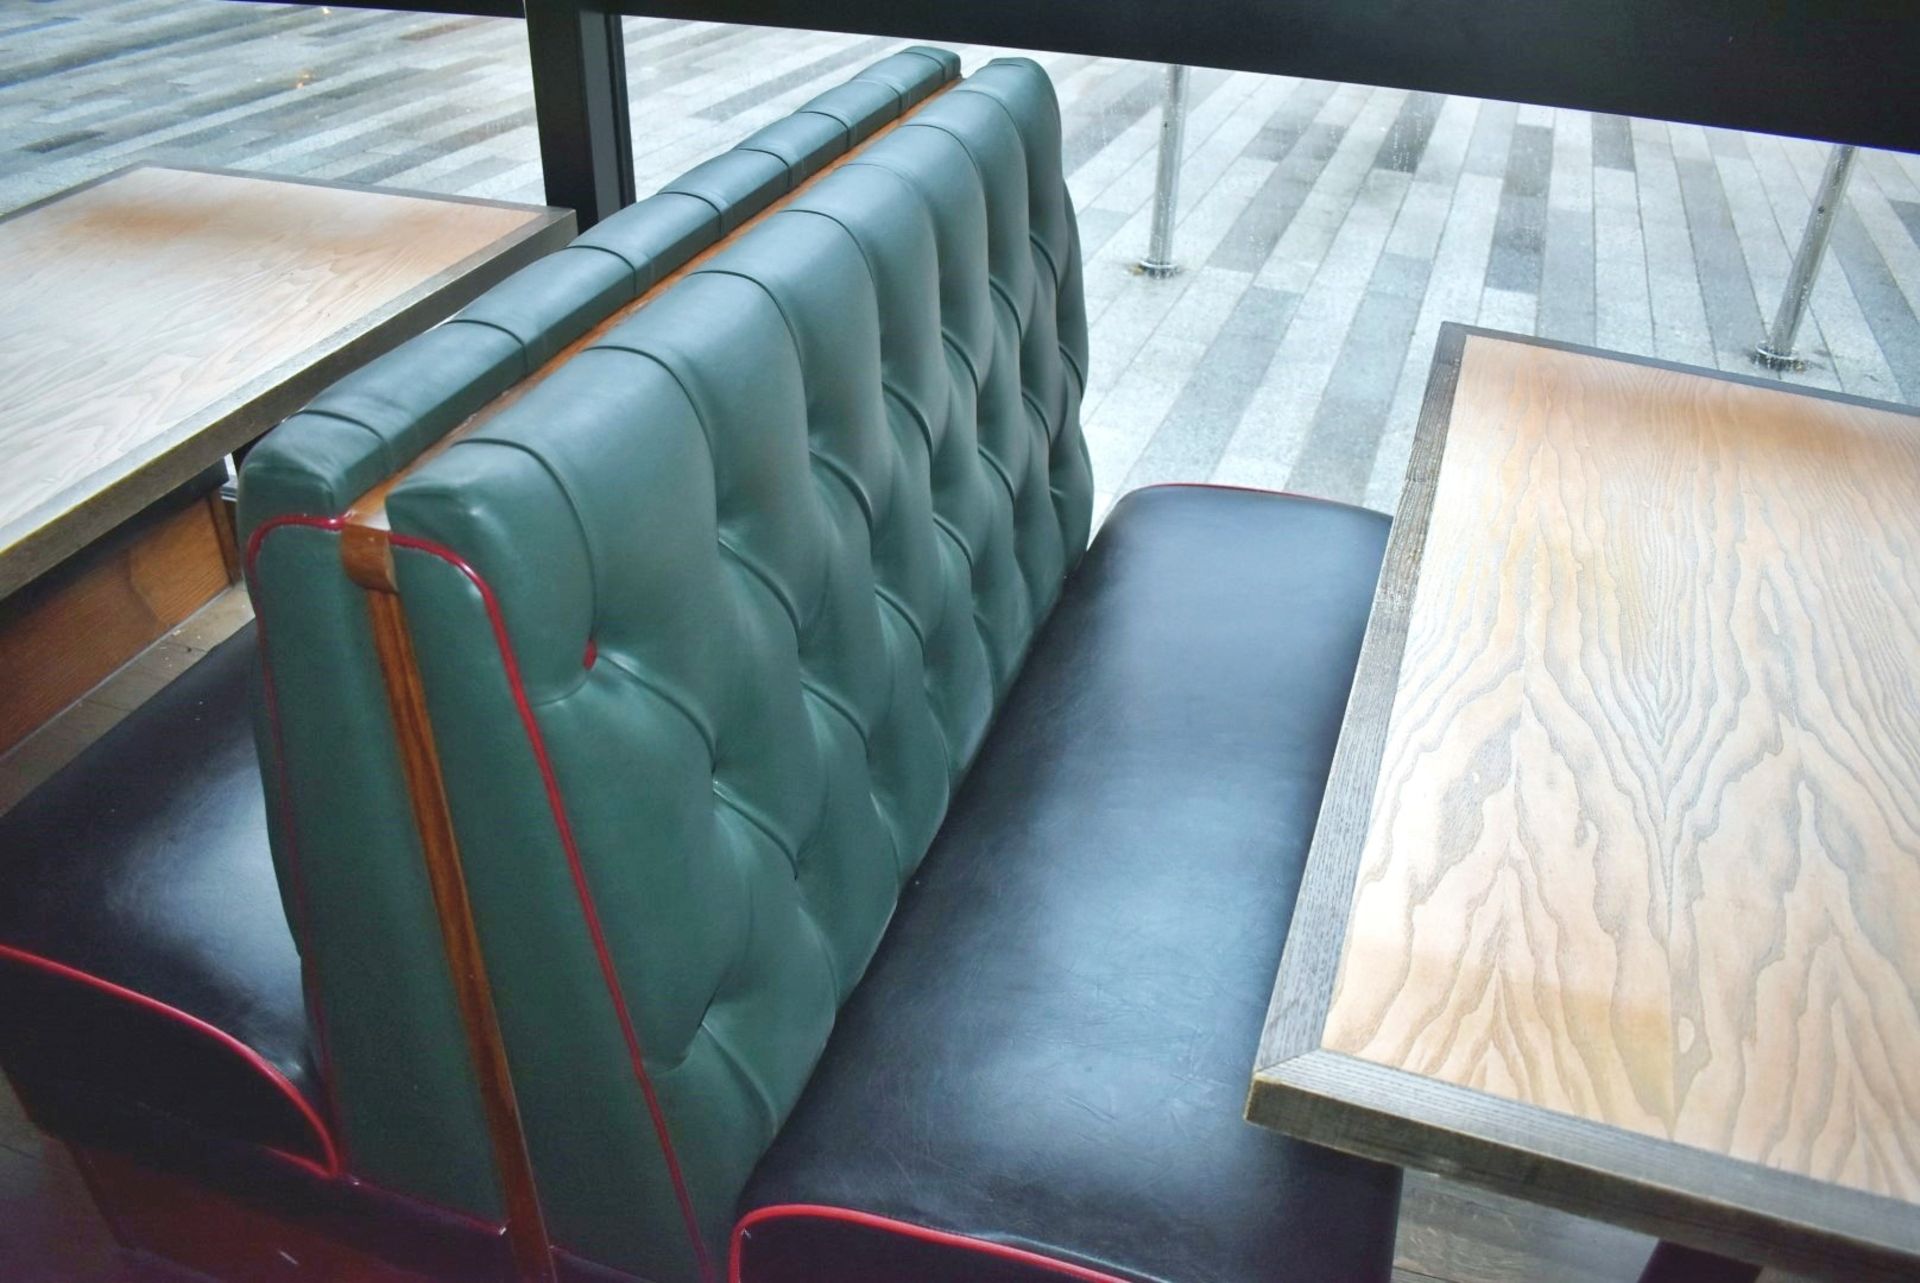 4 x Sections of Restaurant Double Booth Seating - Sits Up to 12 Persons - Green & Black Upholstery - Image 7 of 24